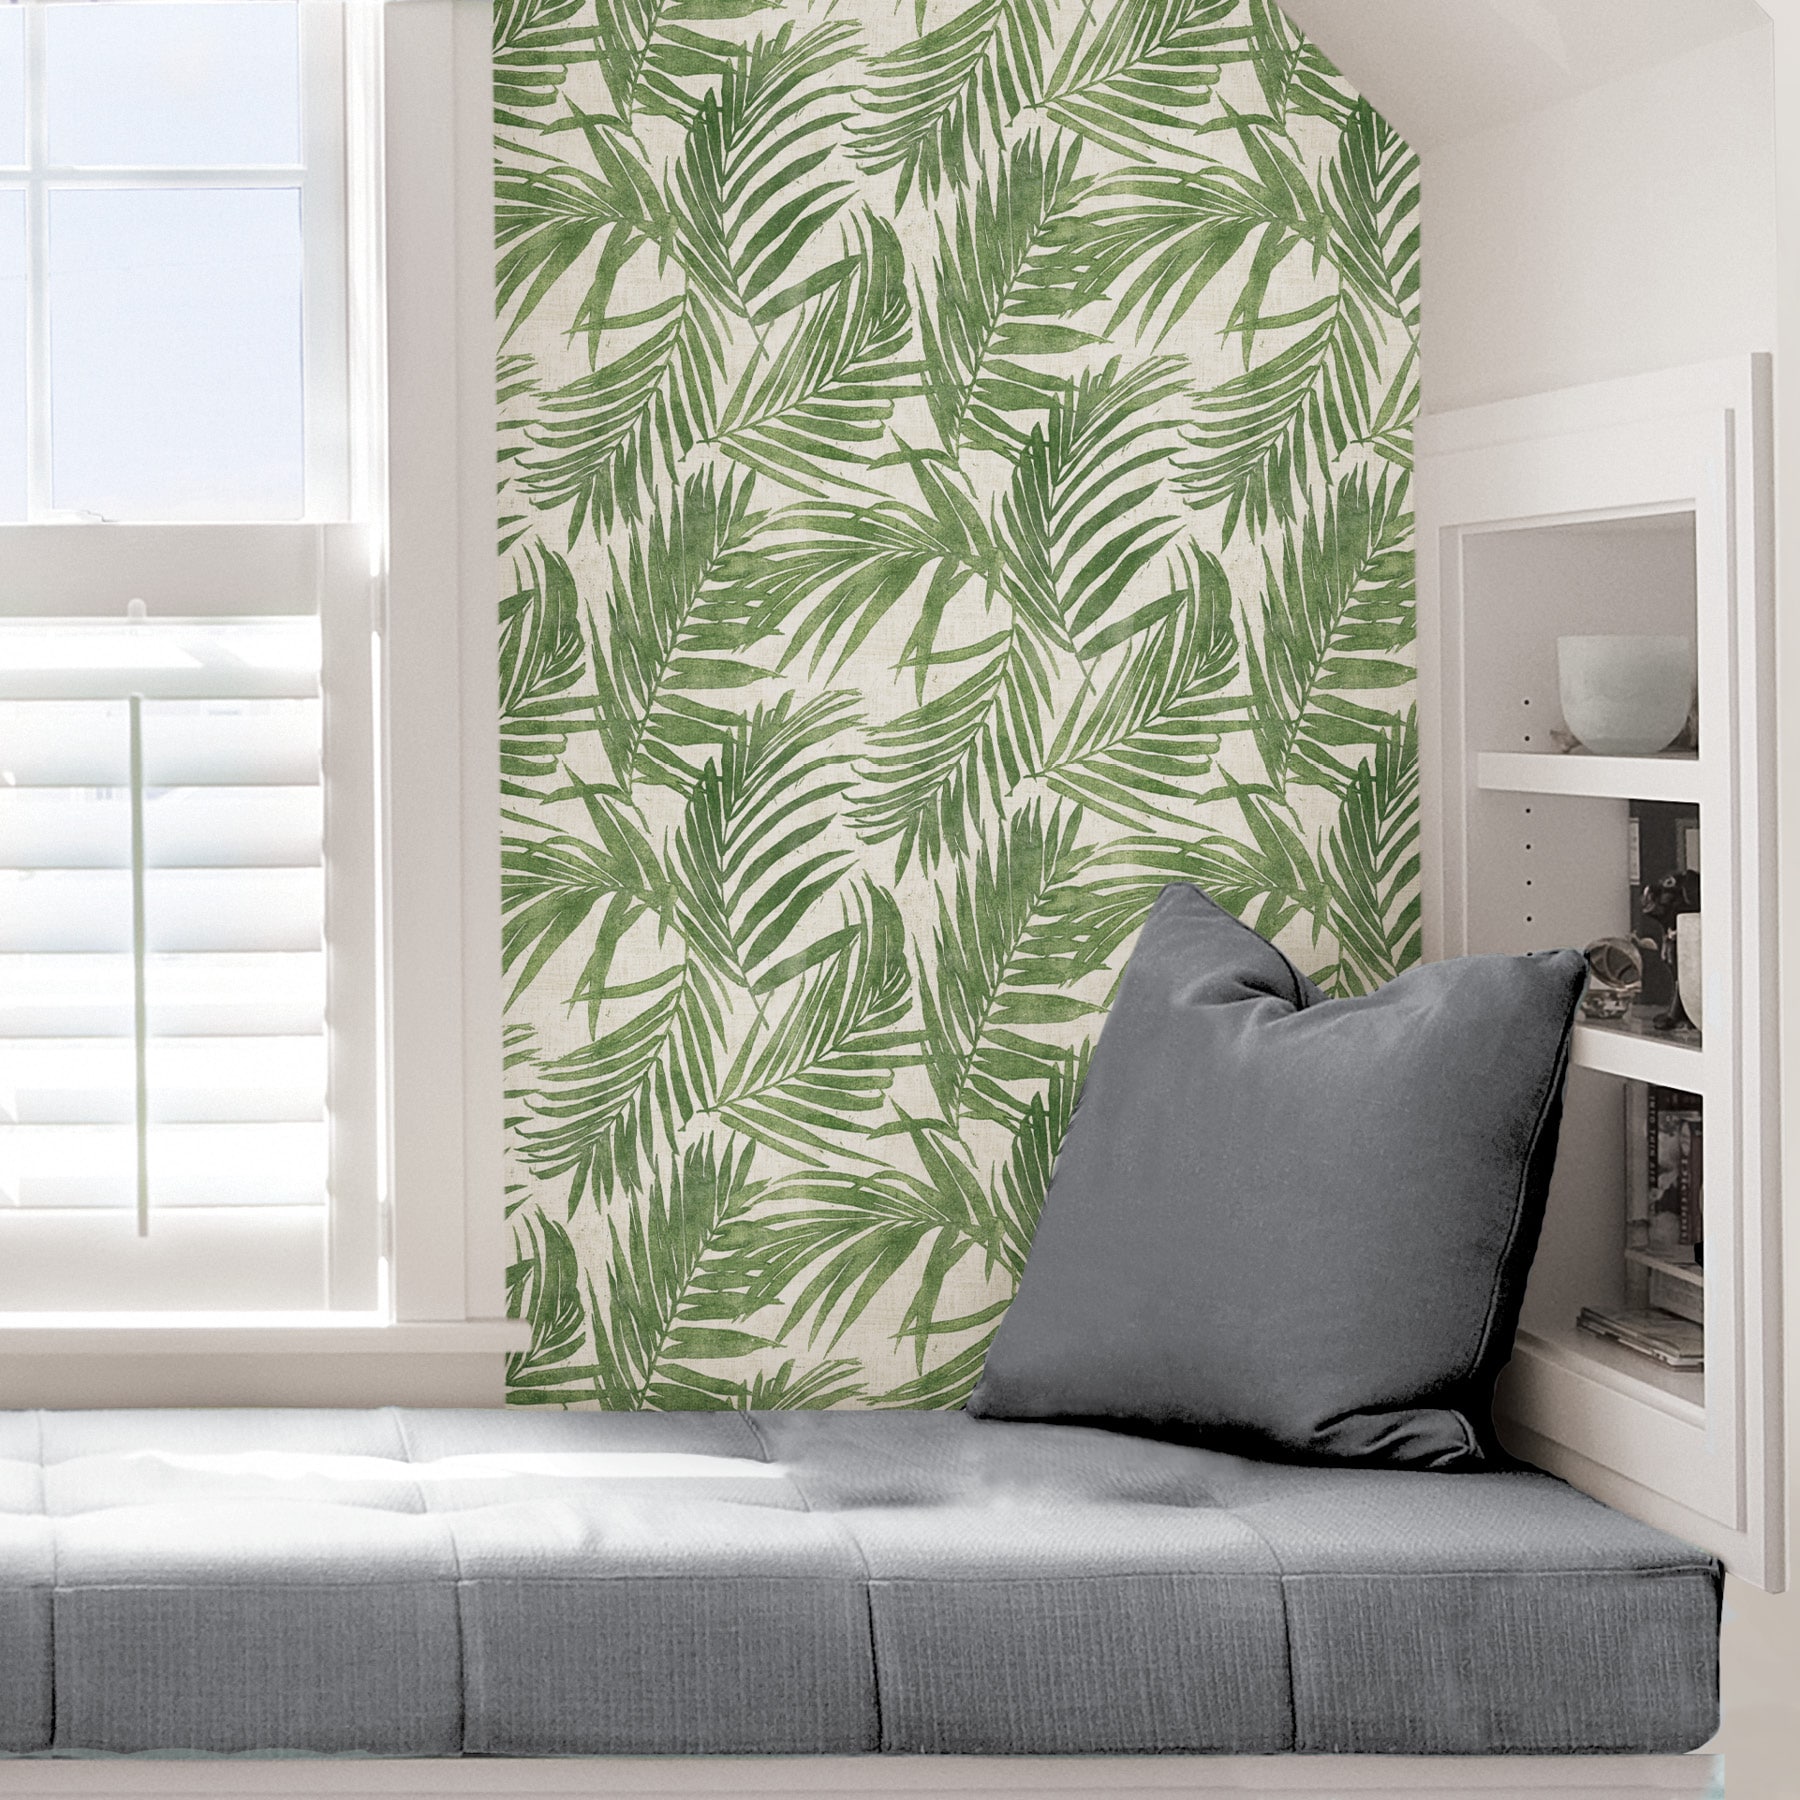 Grasscloth Green Wallpaper in Mumbai at best price by Inthub  Justdial